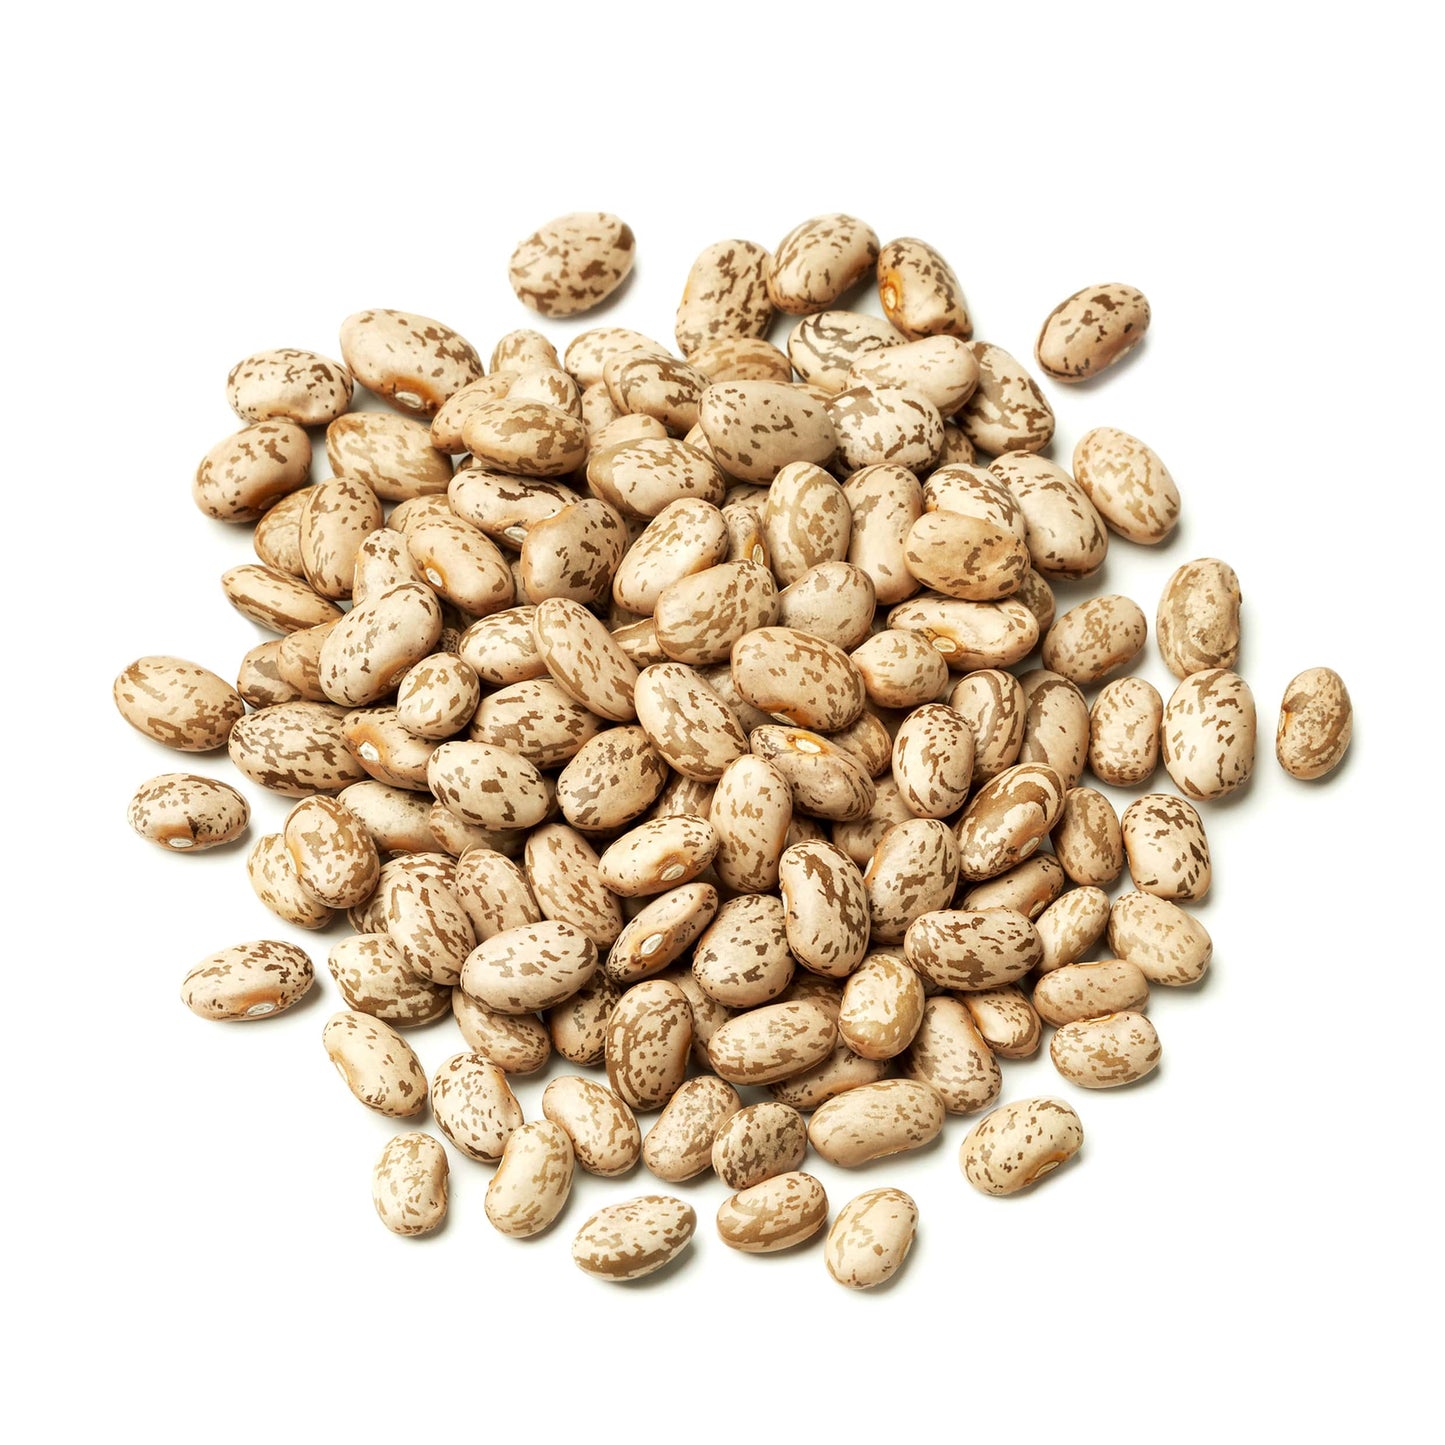 Pinto Beans — Non-GMO Verified, Raw, Dried, Vegan, Kosher, Bulk Frijol Seeds, Good Source of Protein, Fiber, Folate, Copper, and Thiamin. Low Sodium, Low Fat, Great for Cooking, Soups, Chili. Made in USA